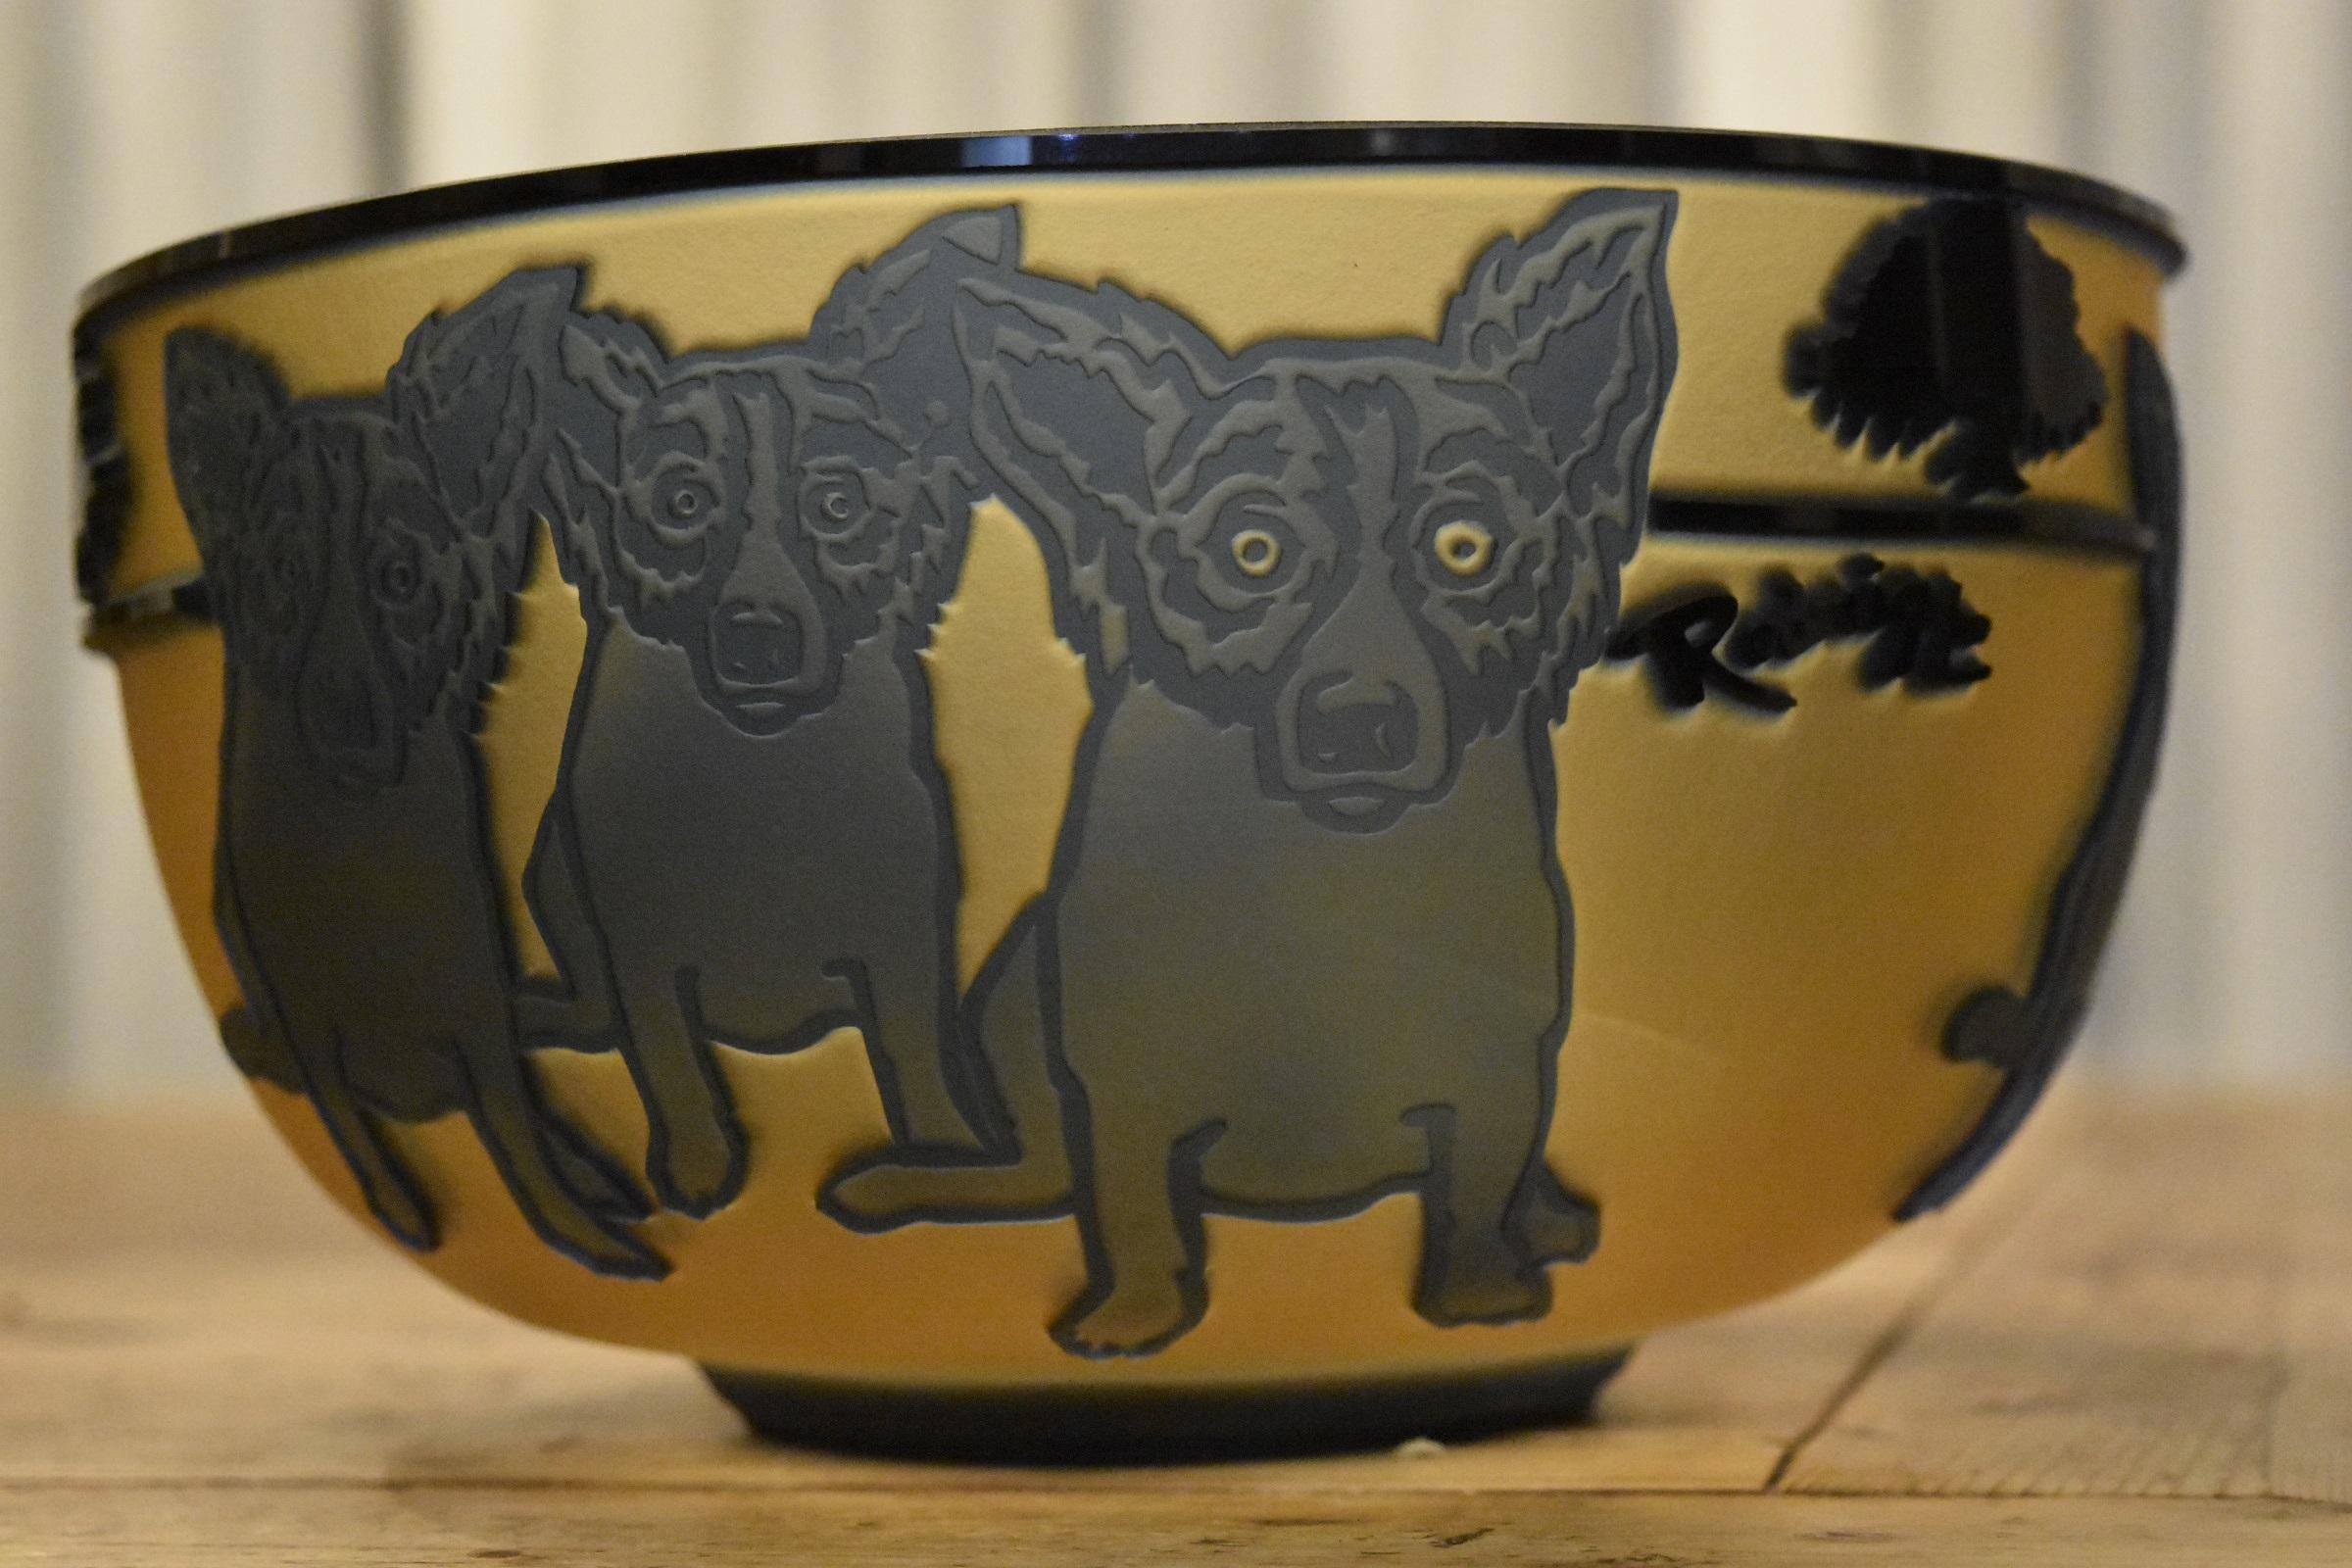 Artist:  George Rodrigue
Title:  Blue Dog Rare Cameo Glass Decorative Bowl 
Medium:  Layered Glass
Edition:  1 of 35
Date:  1994
Dimensions:  Ht 5